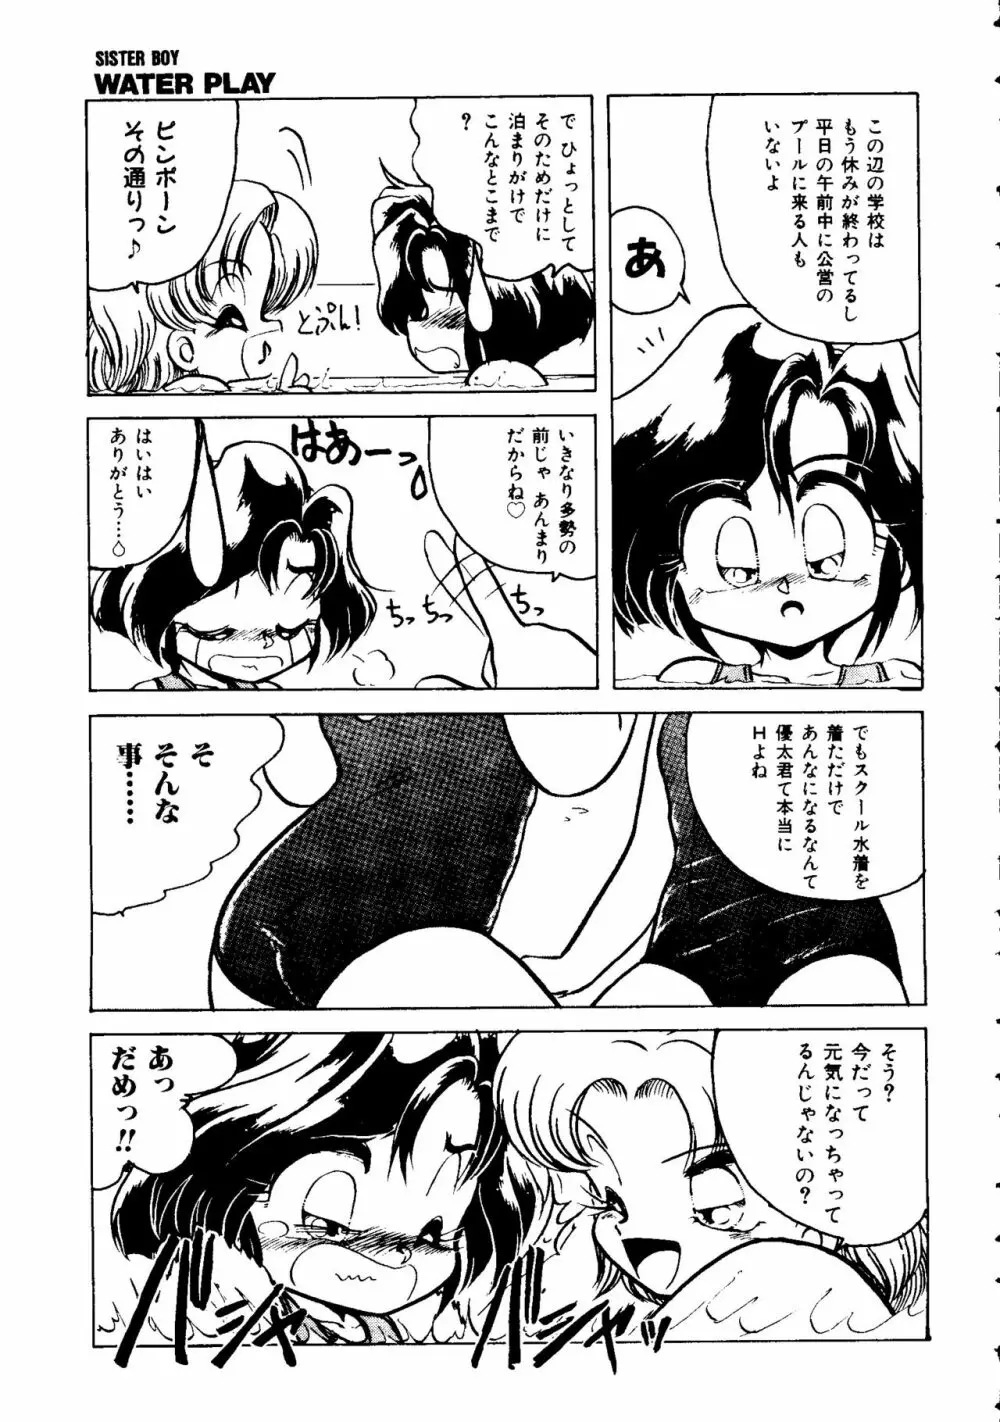 SISTER BOY EX2 -WATER PLAY- Page.5